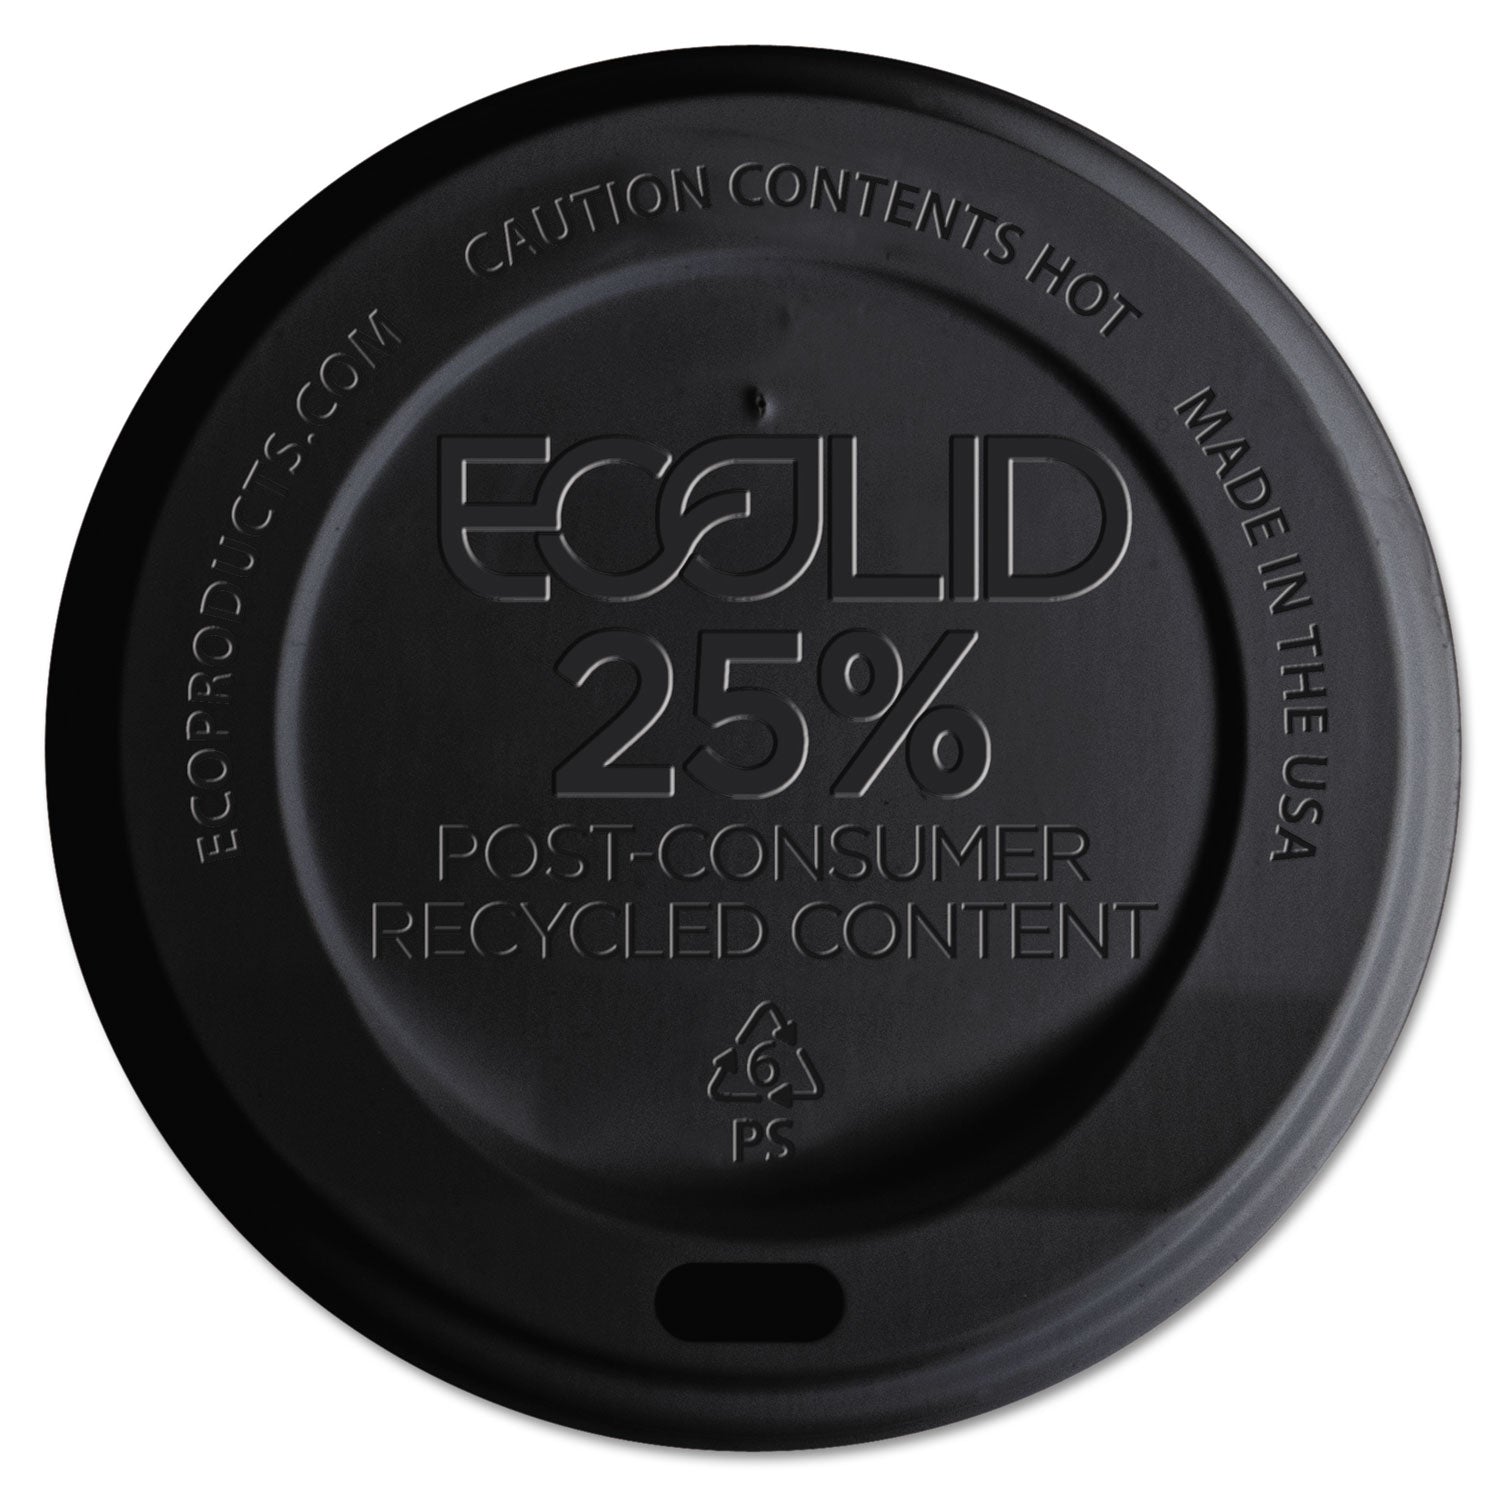 ecolid-25%-recycled-content-hot-cup-lid-black-fits-10-oz-to-20-oz-cups-100-pack-10-packs-carton_ecoephl16br - 1